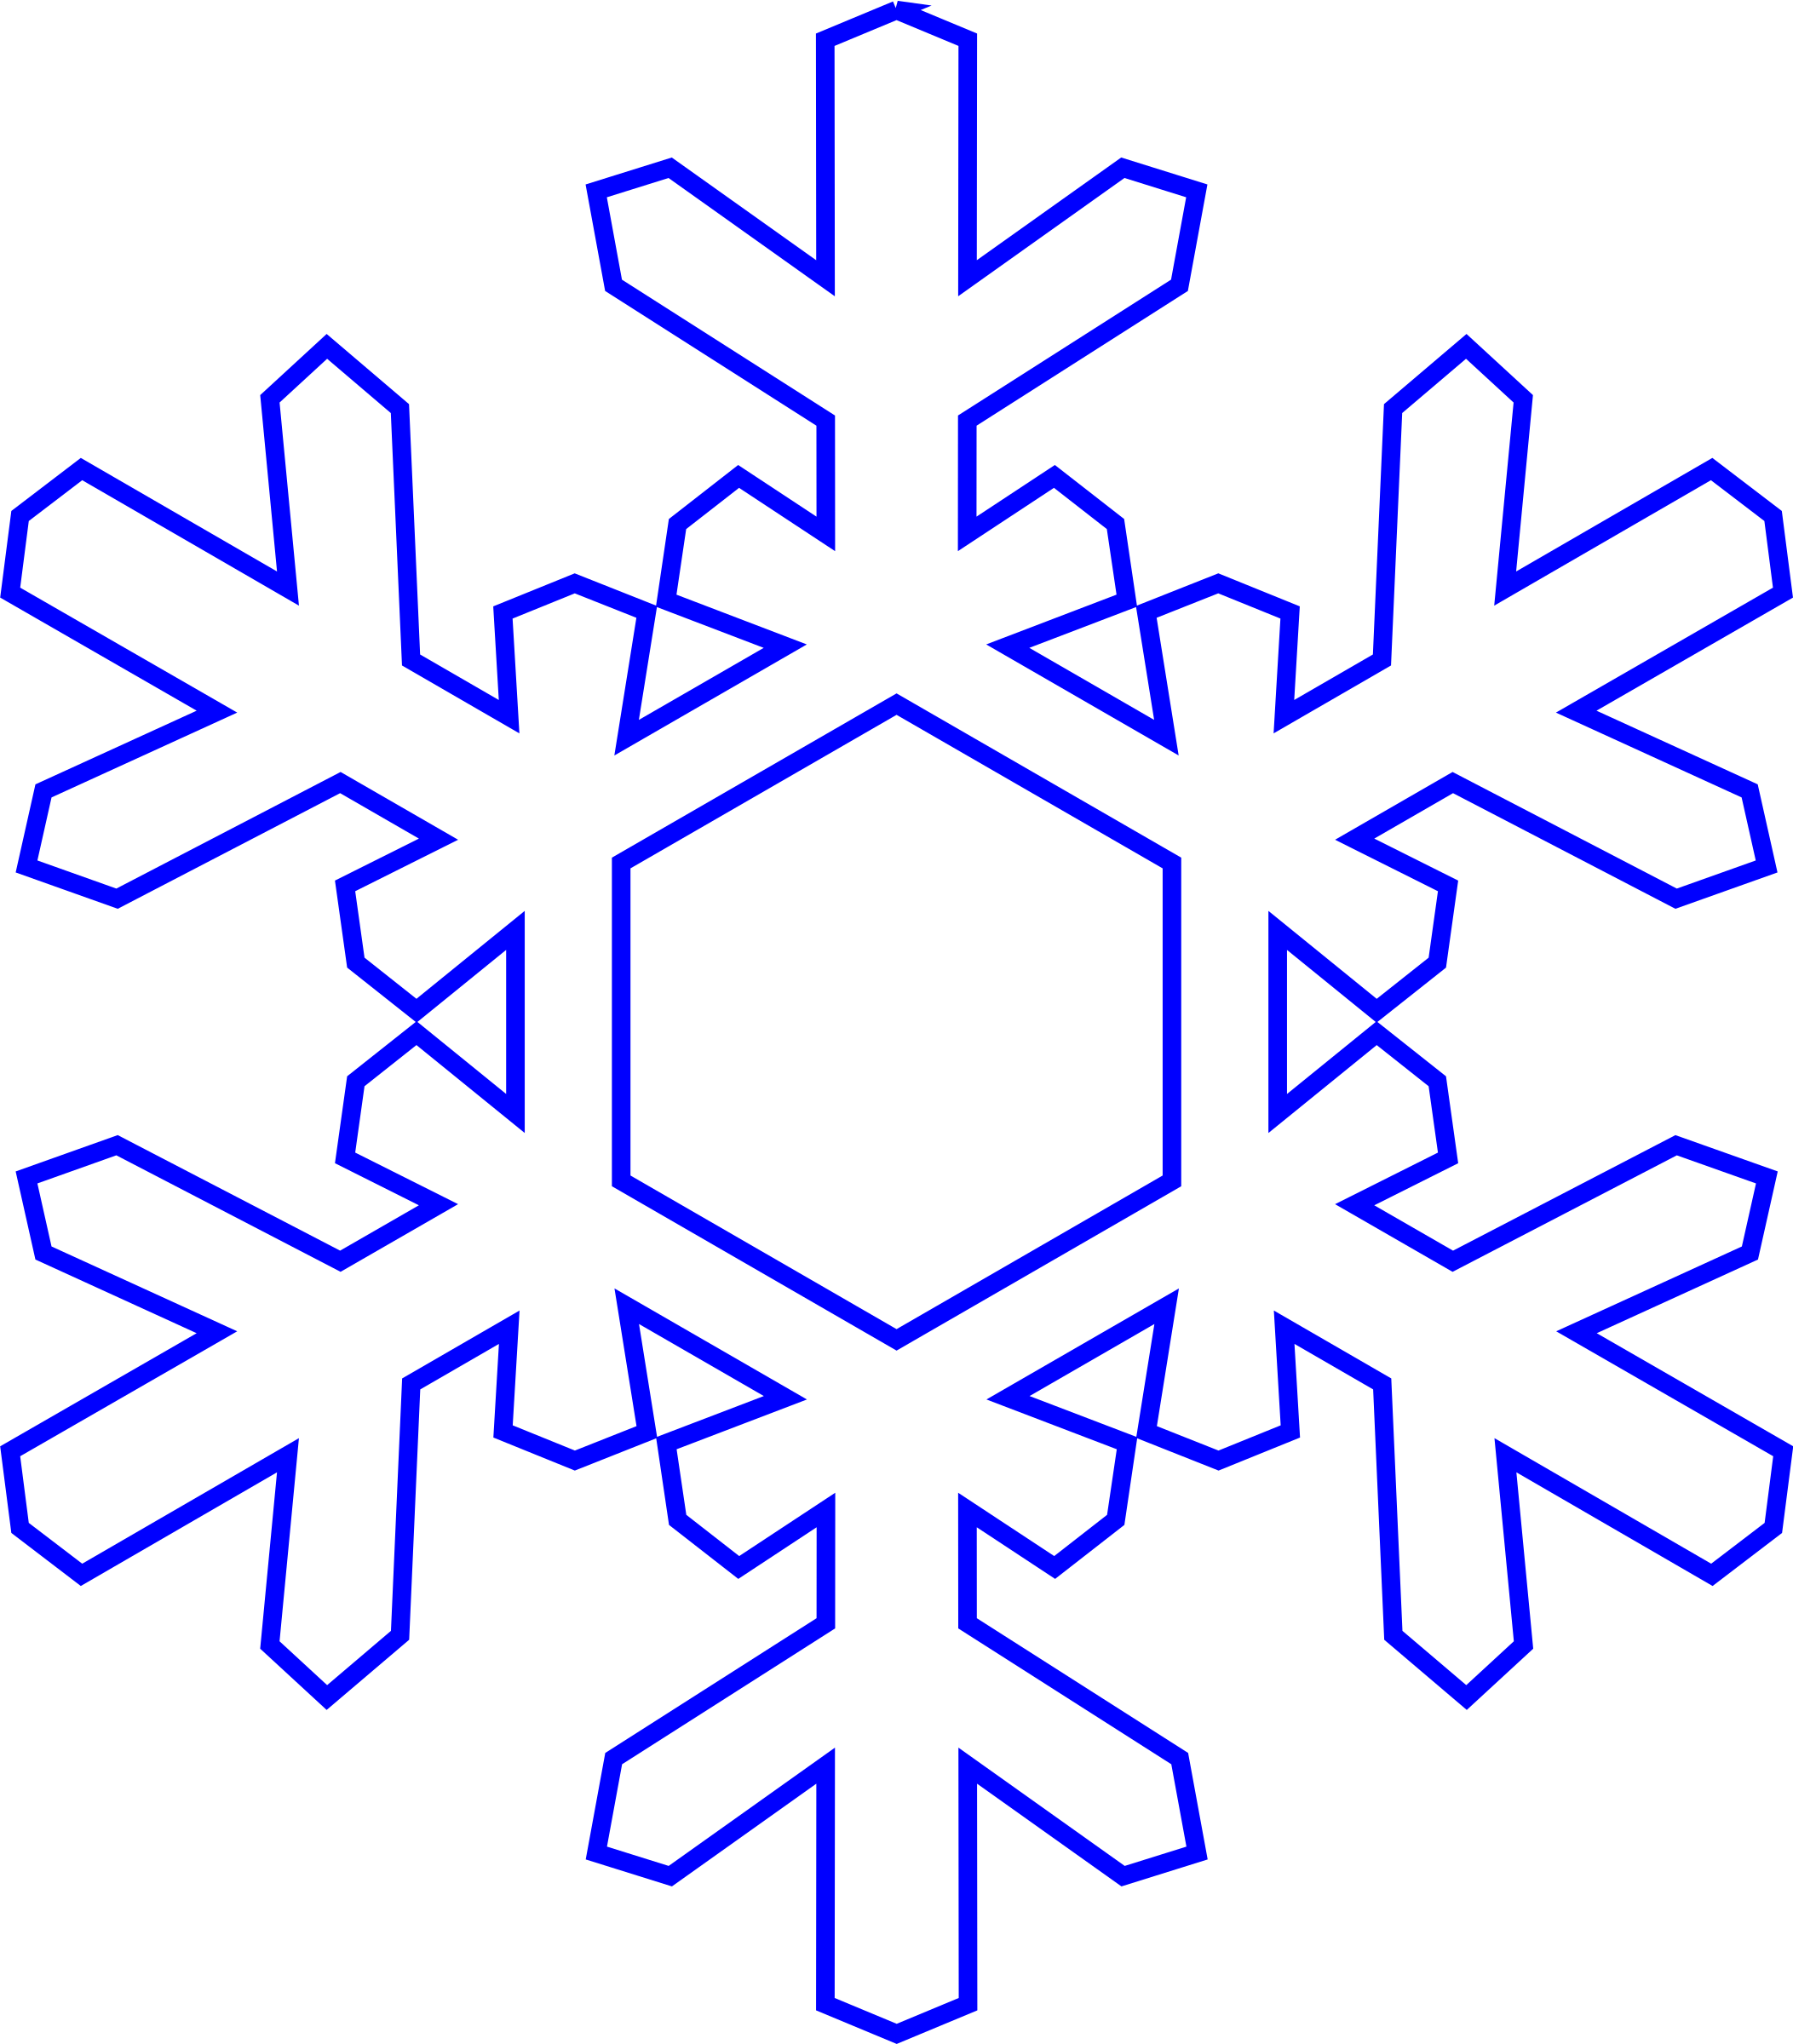 Download Snowflake Vector Graphic image - Free stock photo - Public ...